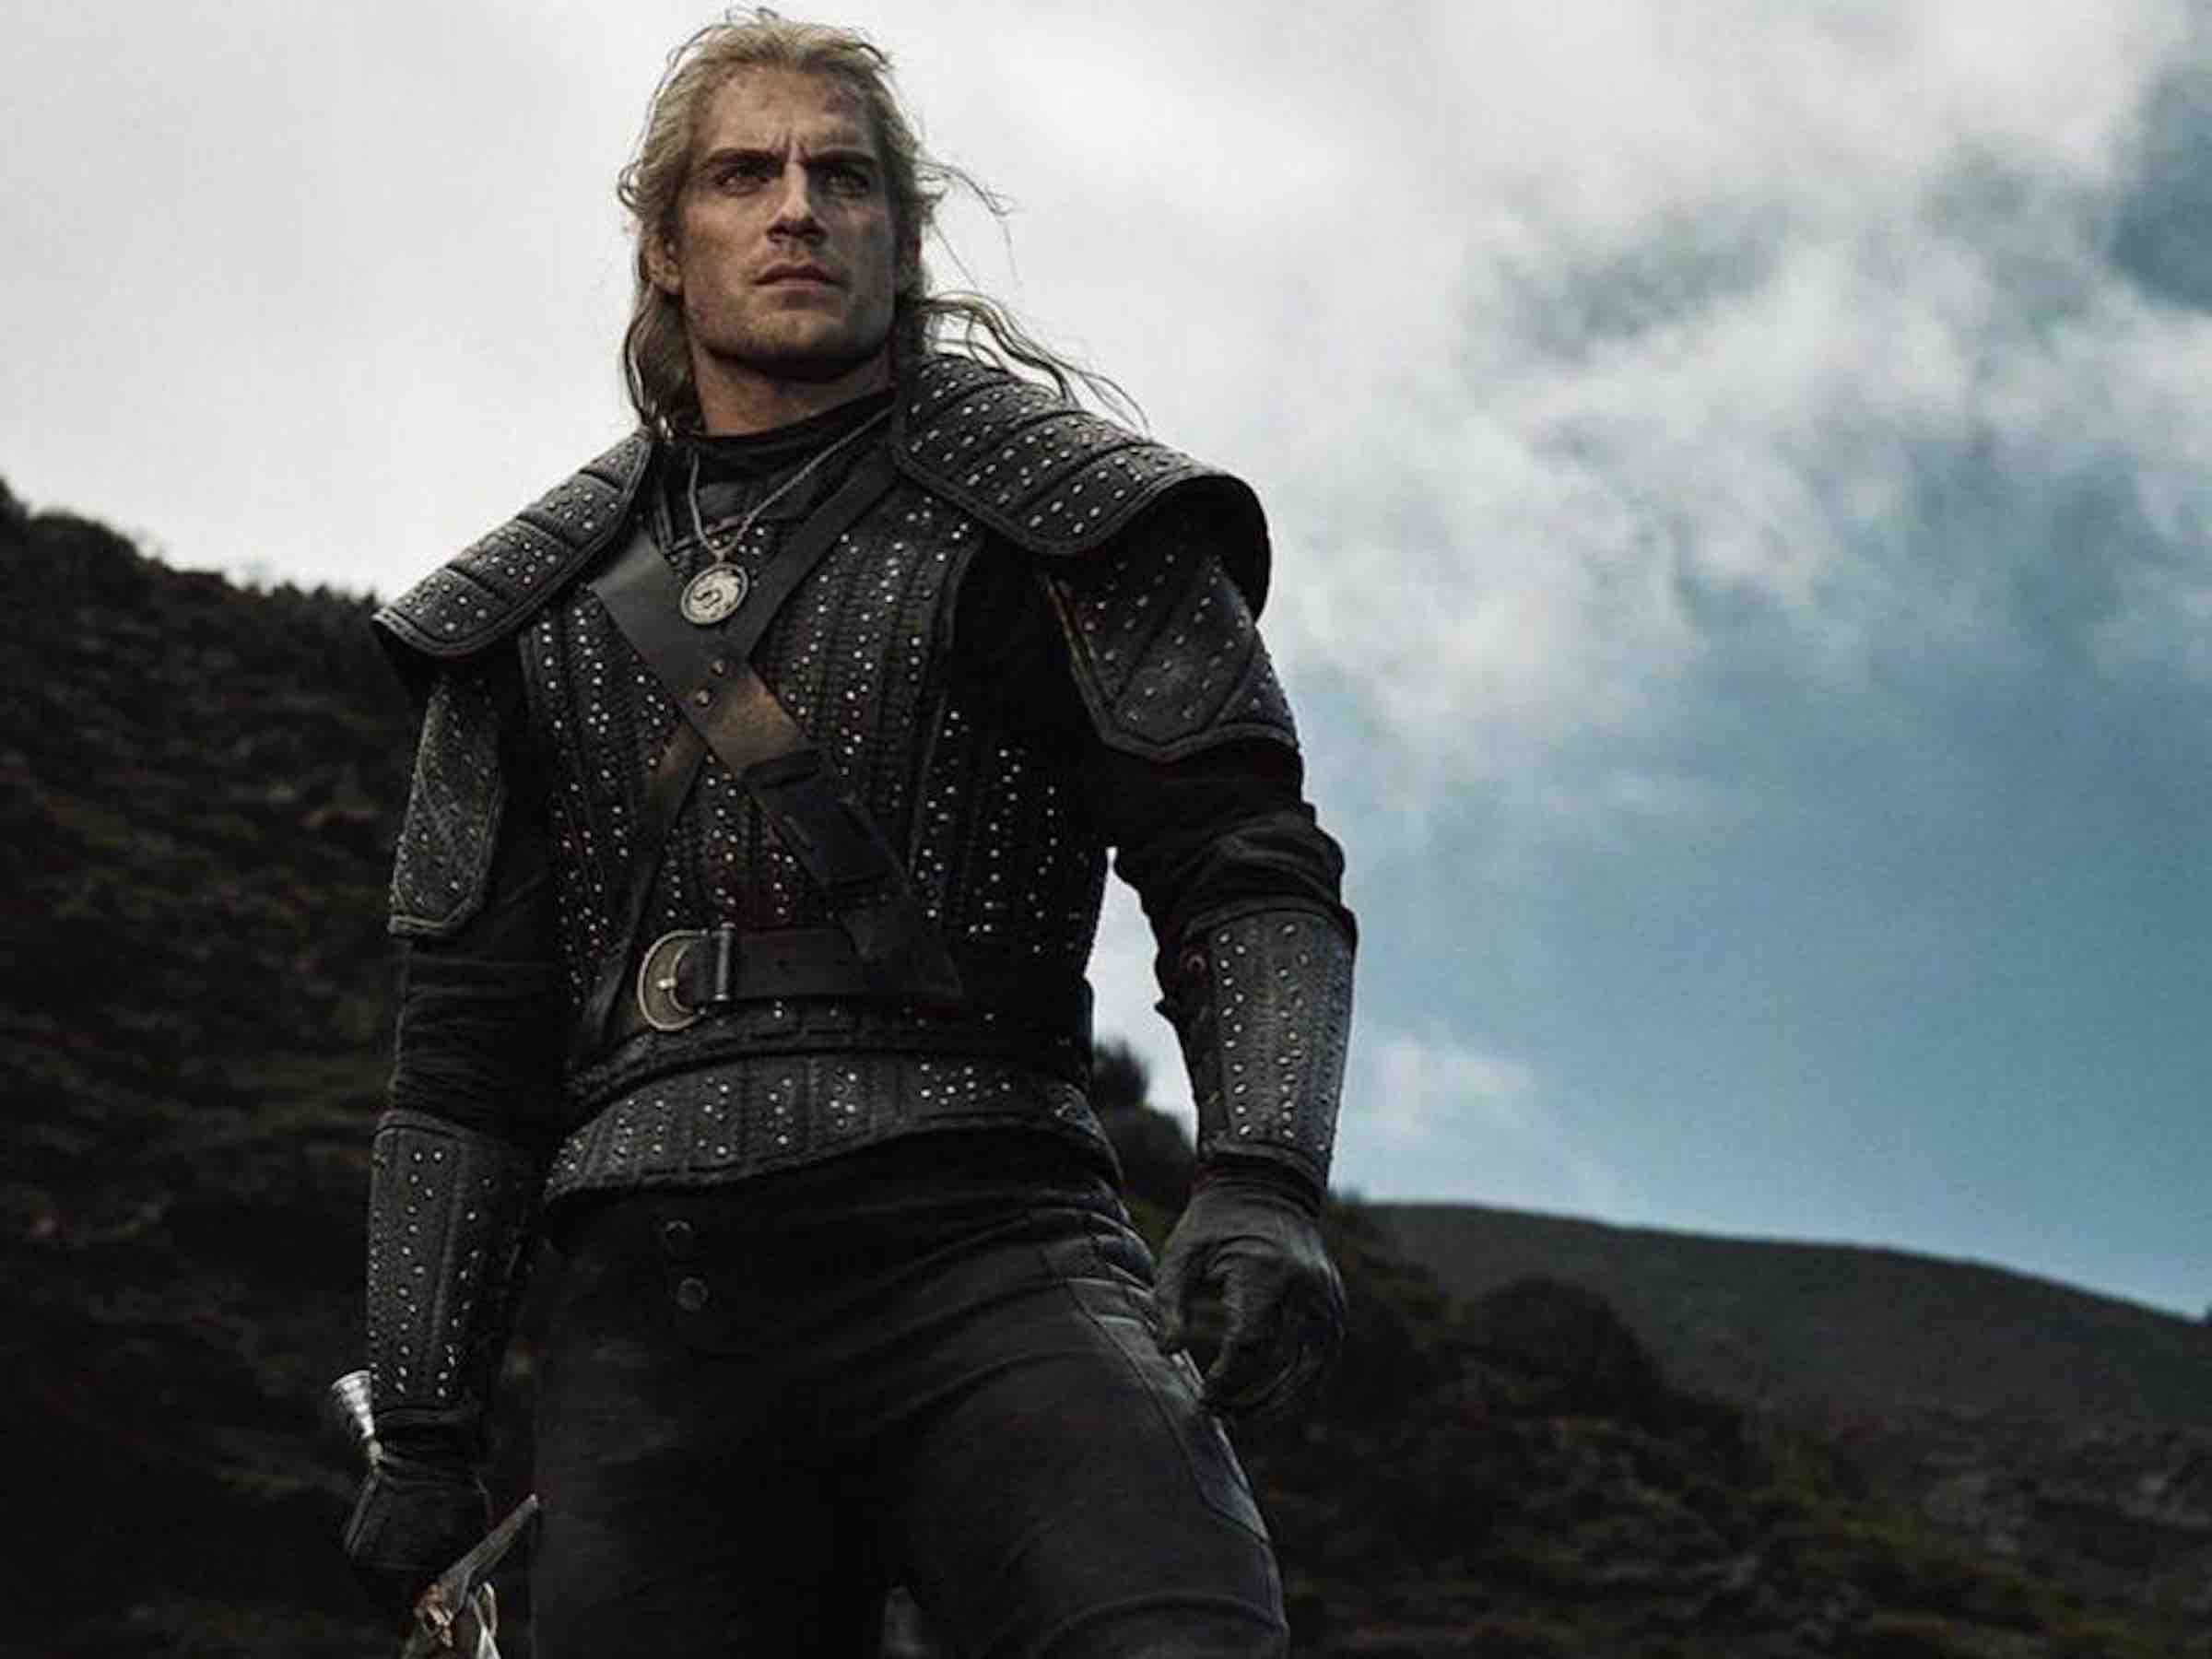 'The Witcher' has gone from books to games to hit show. Here are some of the differences between the show and the book series.